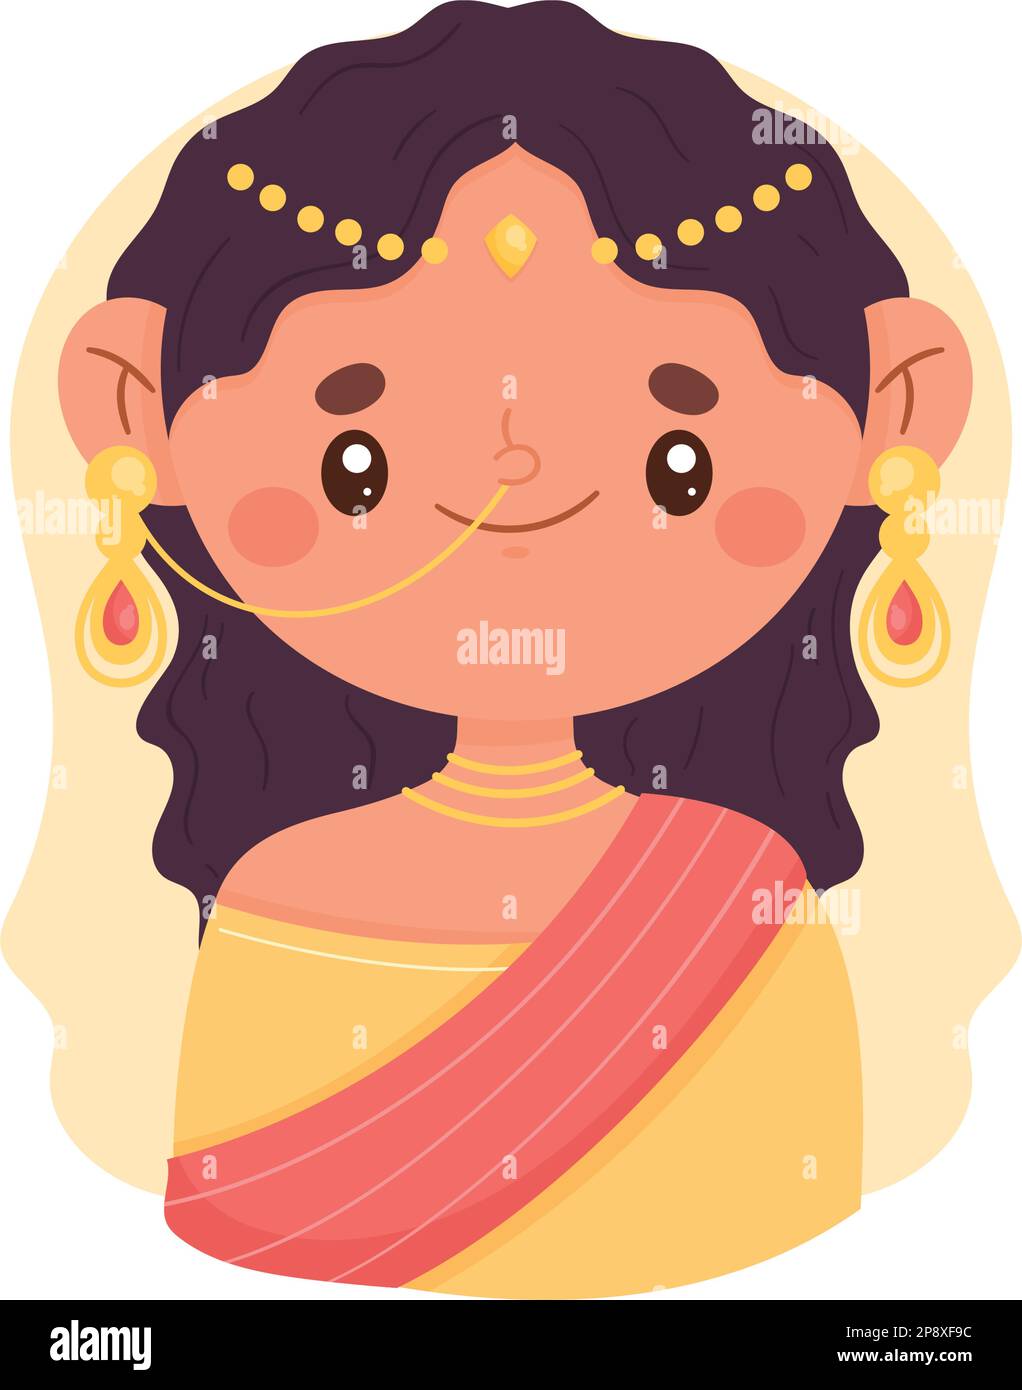 indian woman wearing yellow suit character Stock Vector